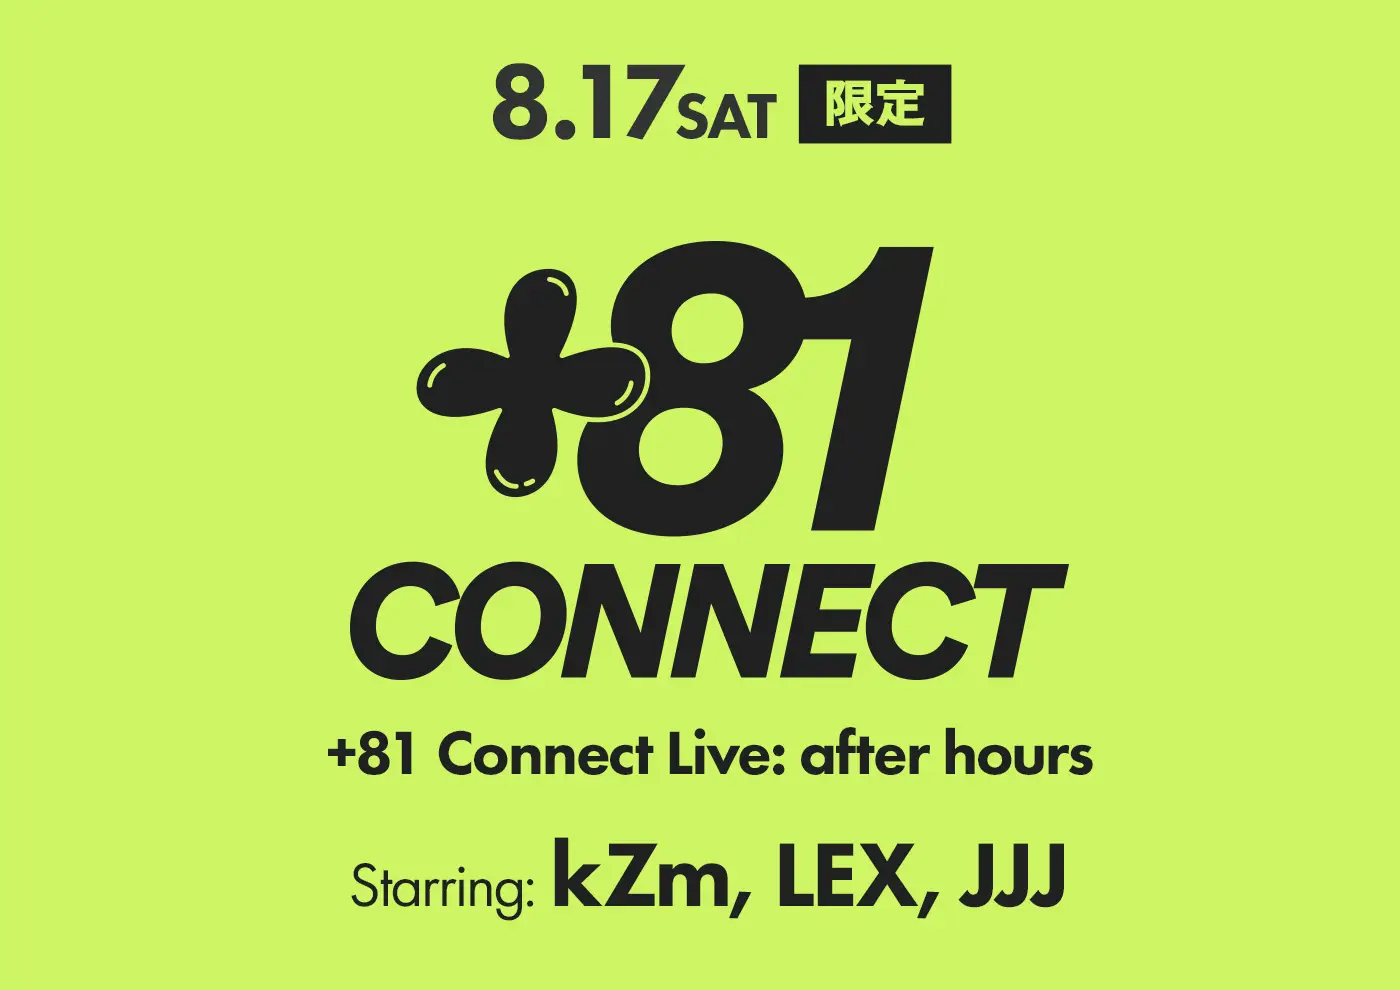 [+81 Connect Live: after hours]Starring kZm, LEX and JJJ